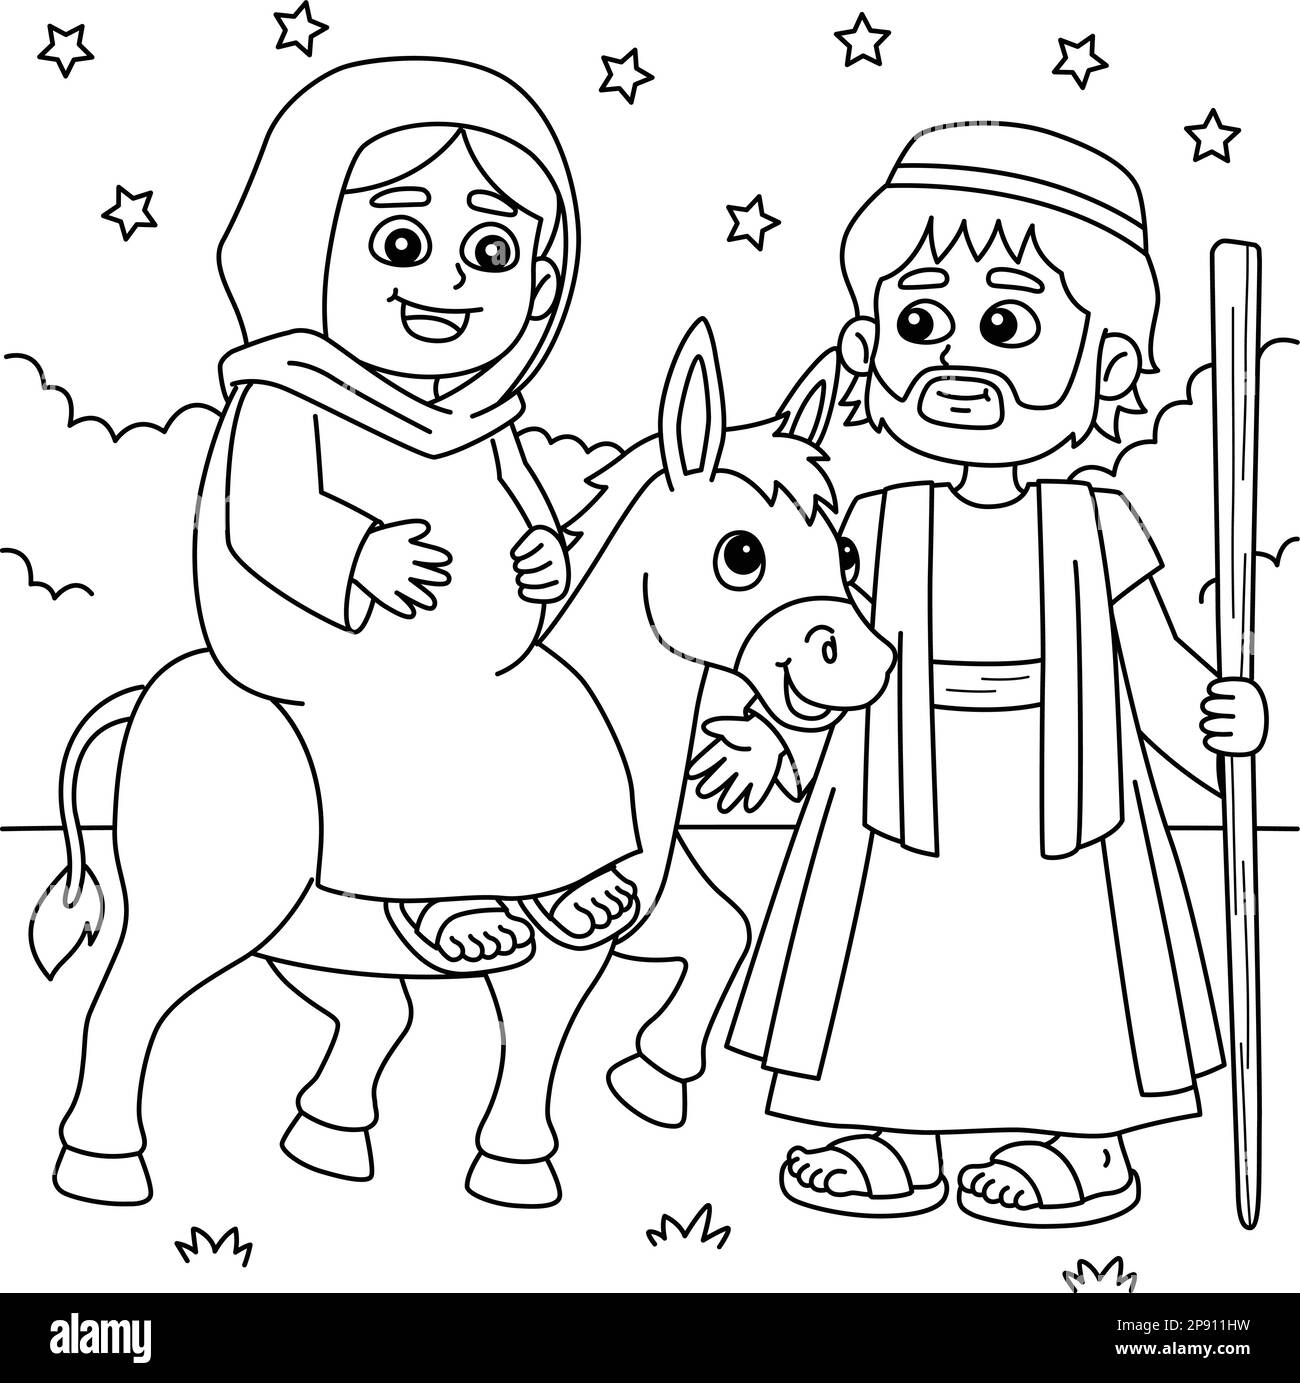 Christian Mary and Joseph Coloring Page for Kids Stock Vector